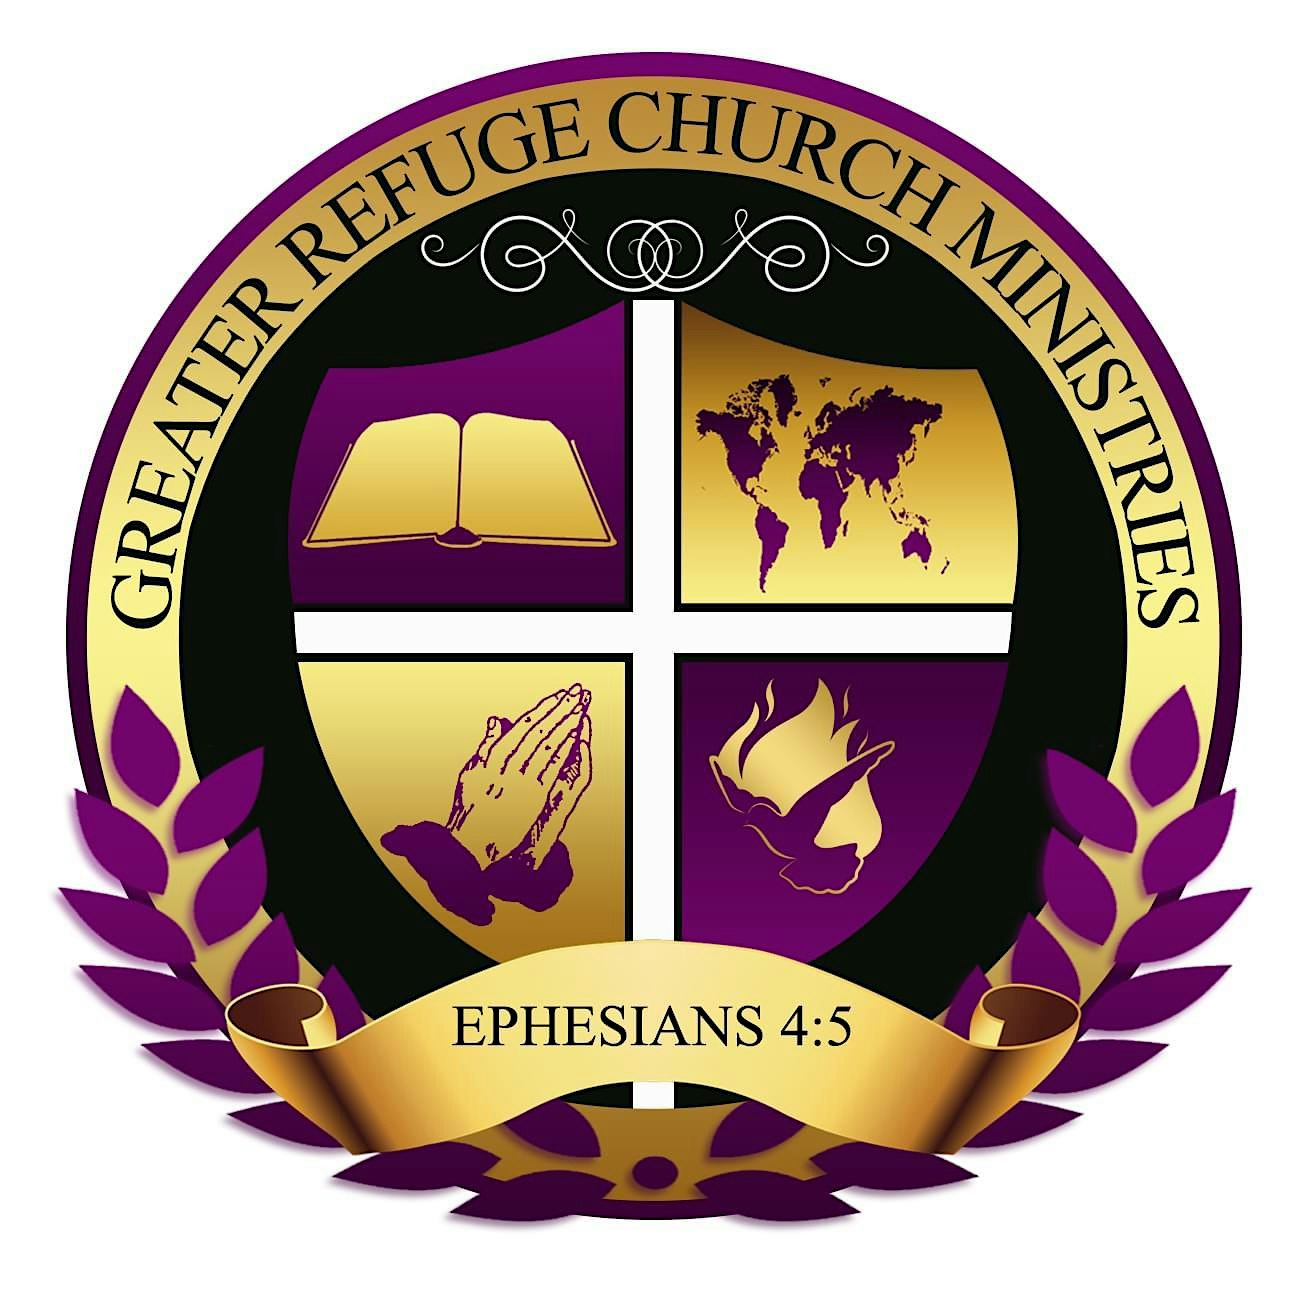 Greater Refuge Church Ministries